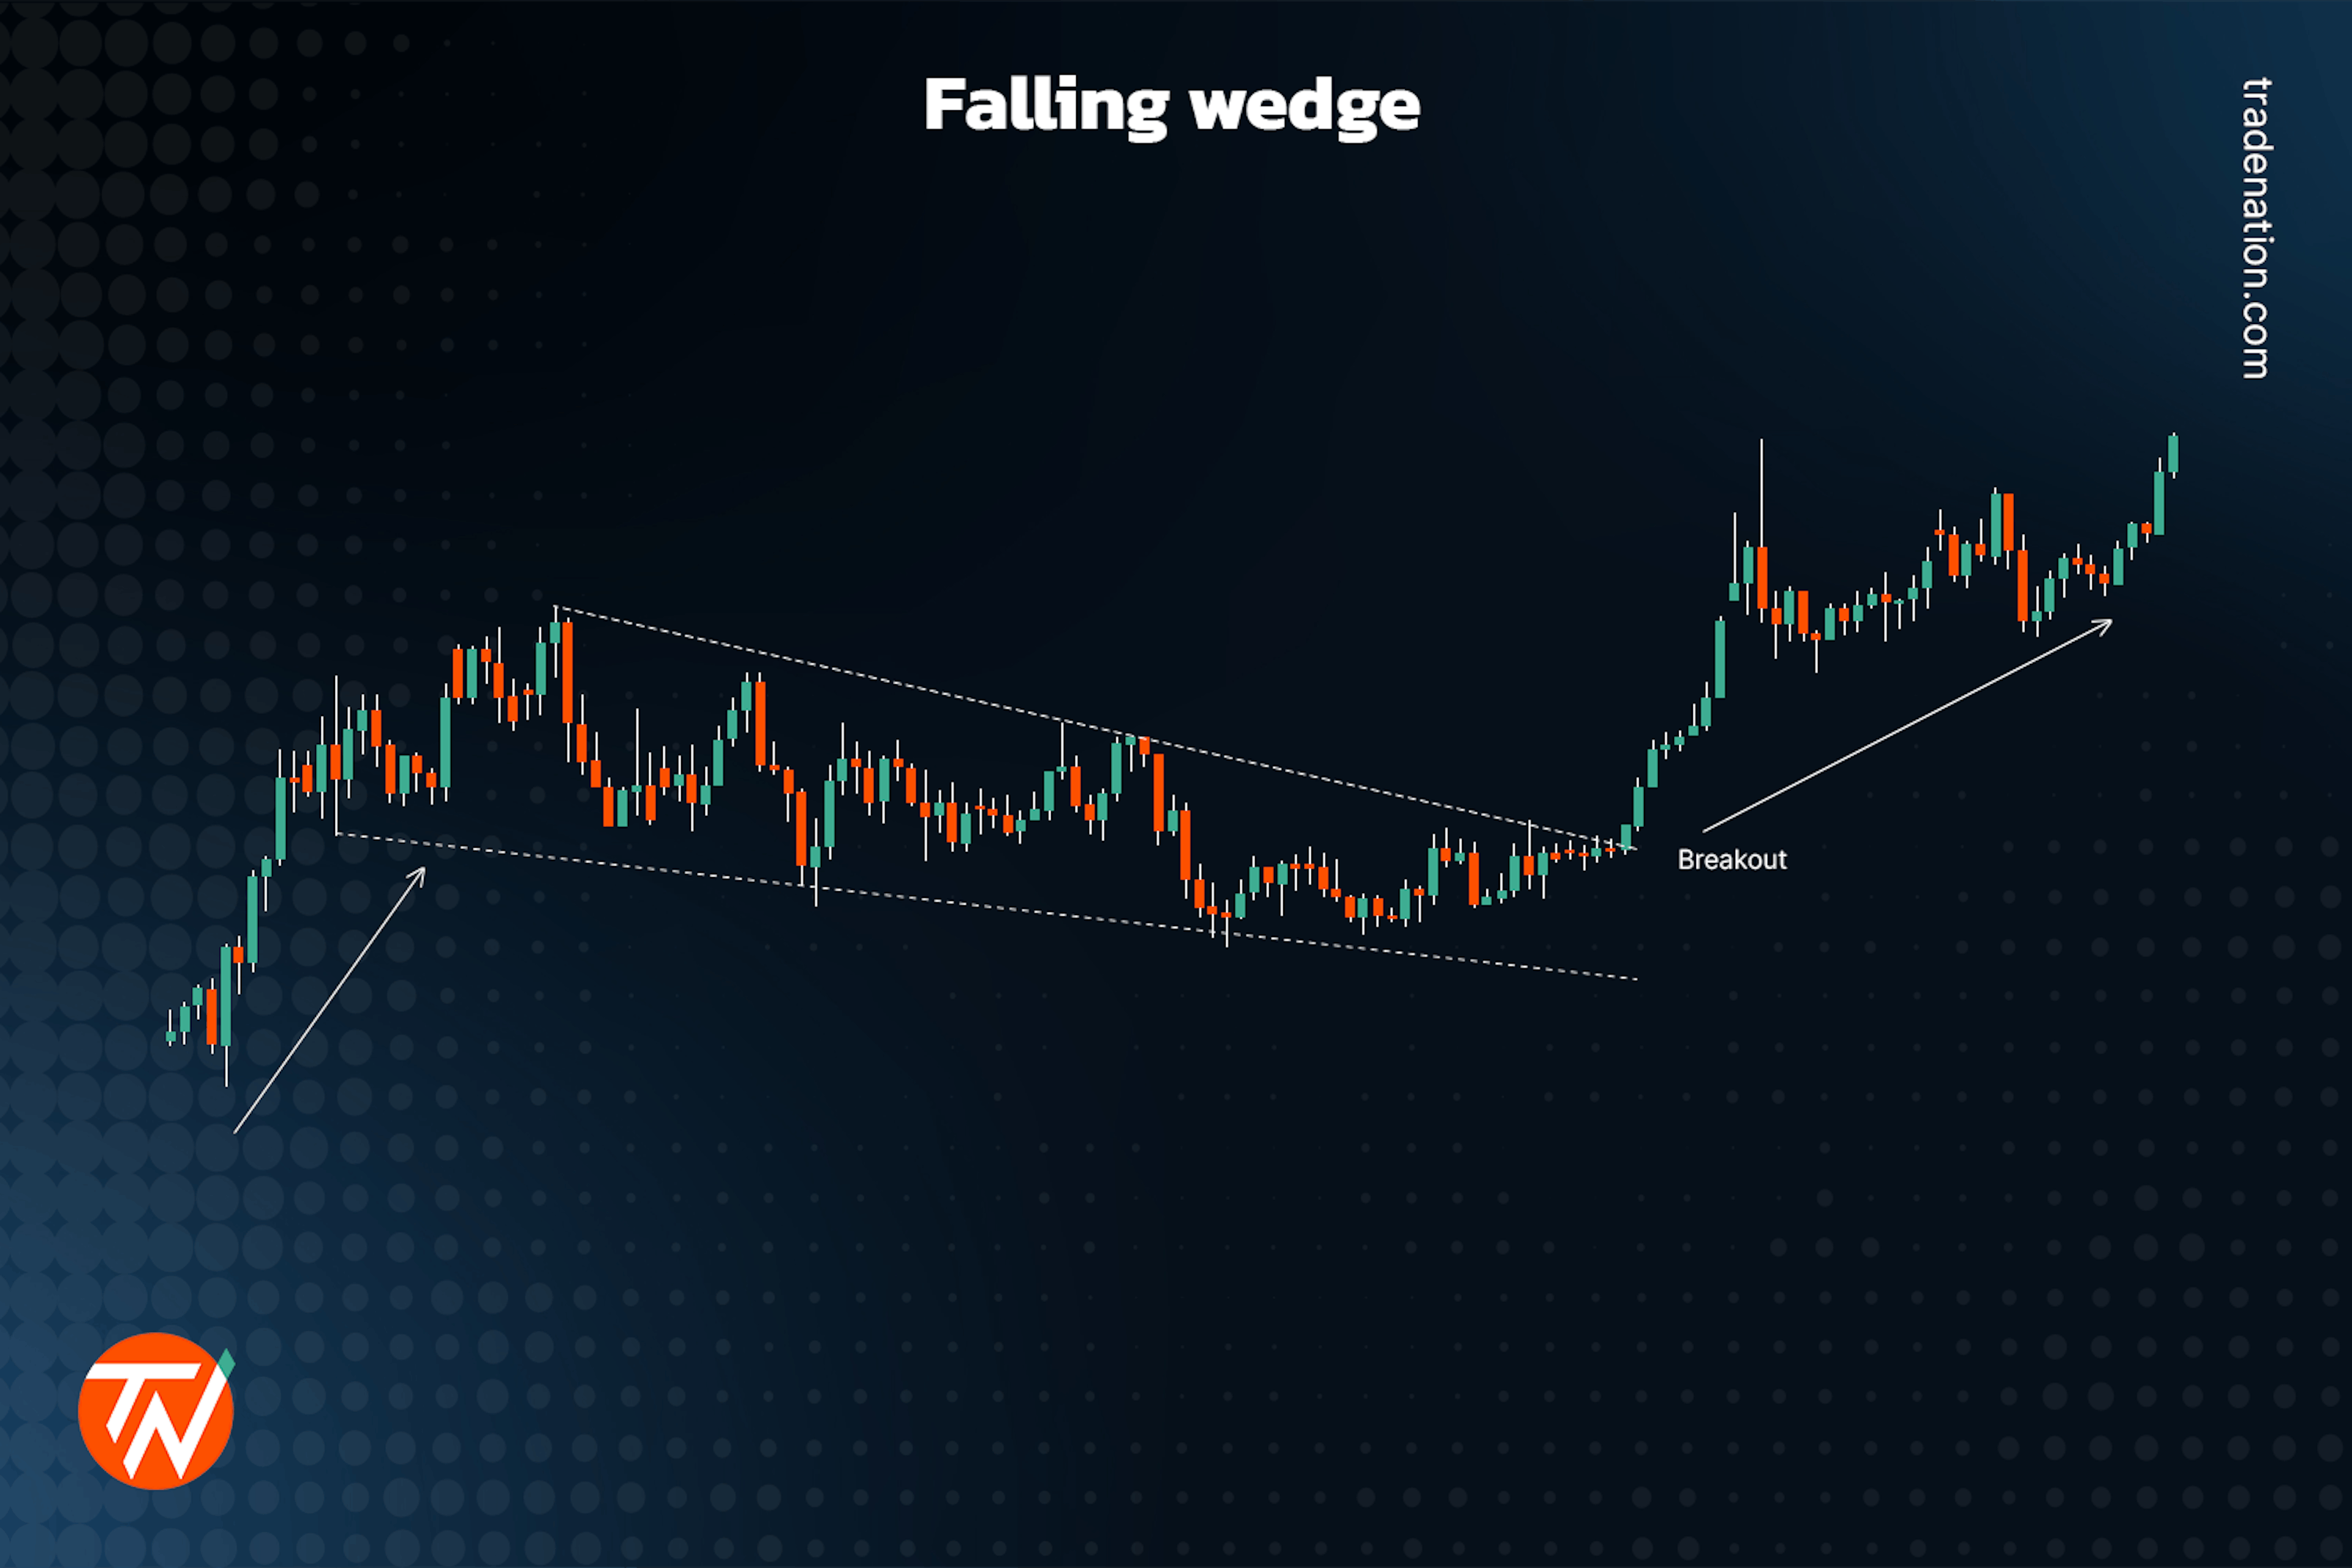 Falling wedges in trading